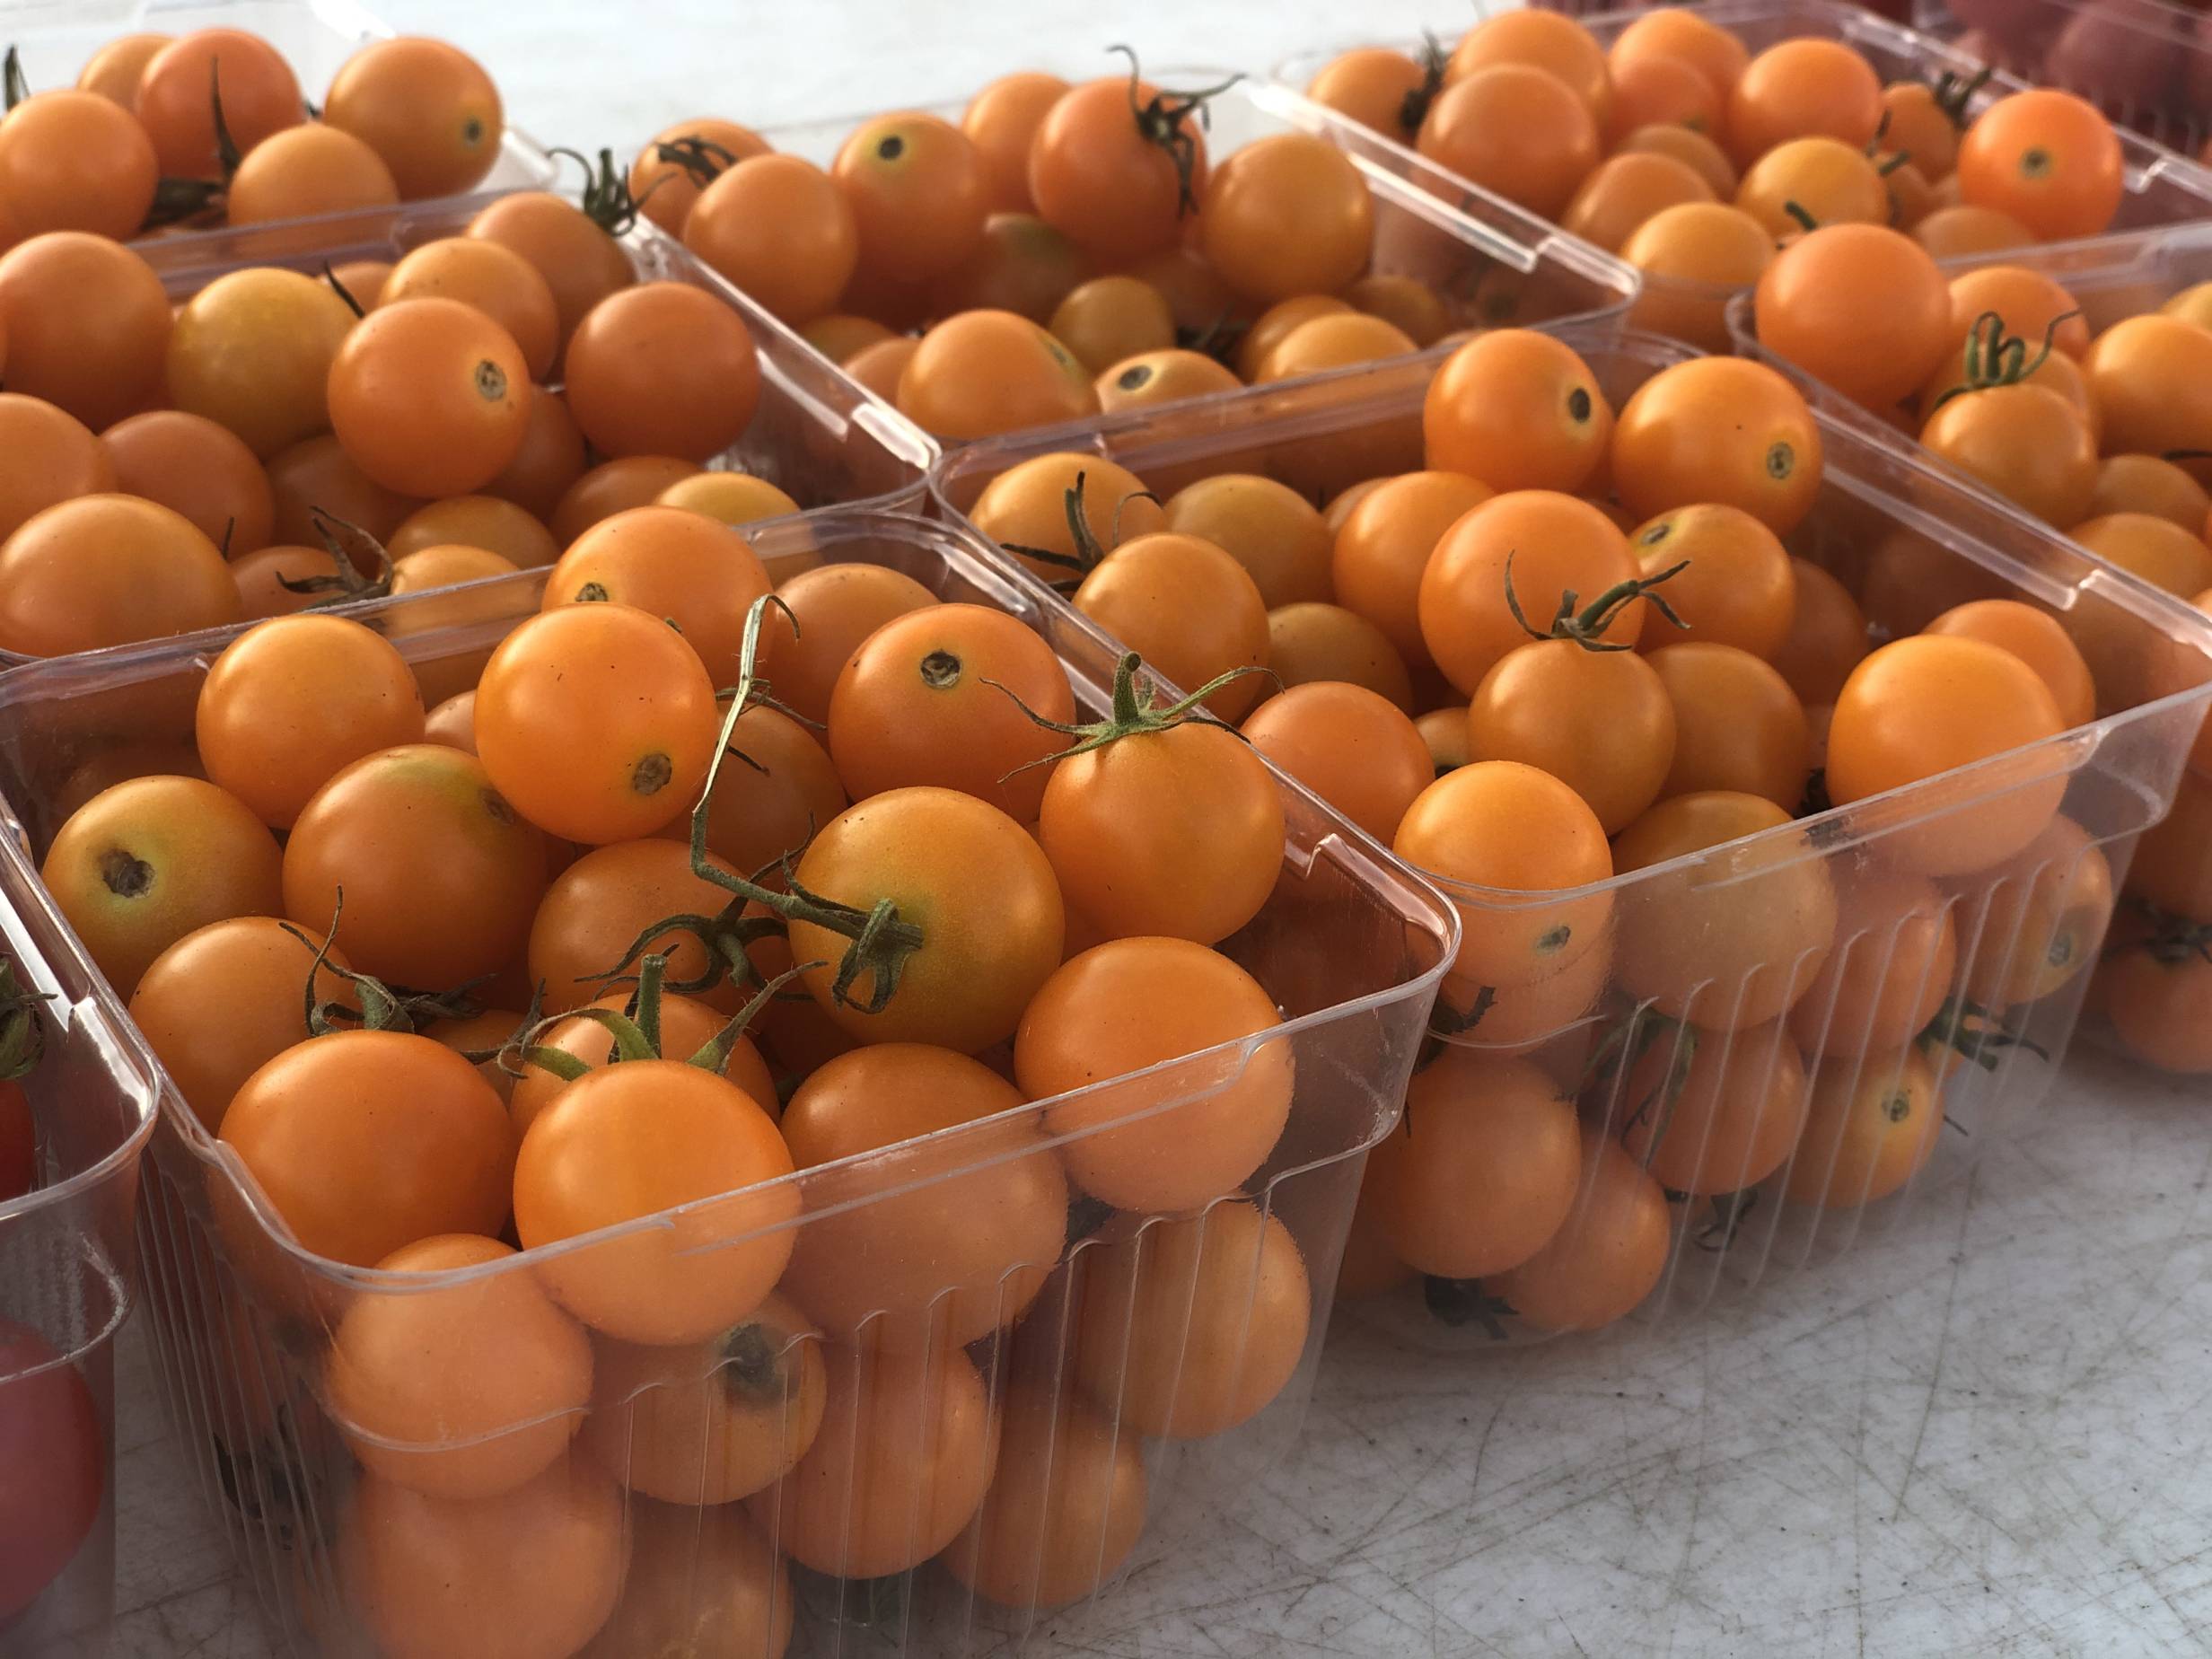 Many square, clear plastic containers hold small, spherical orange tomatoes on the vine. Photo by Alyssa Buckley.